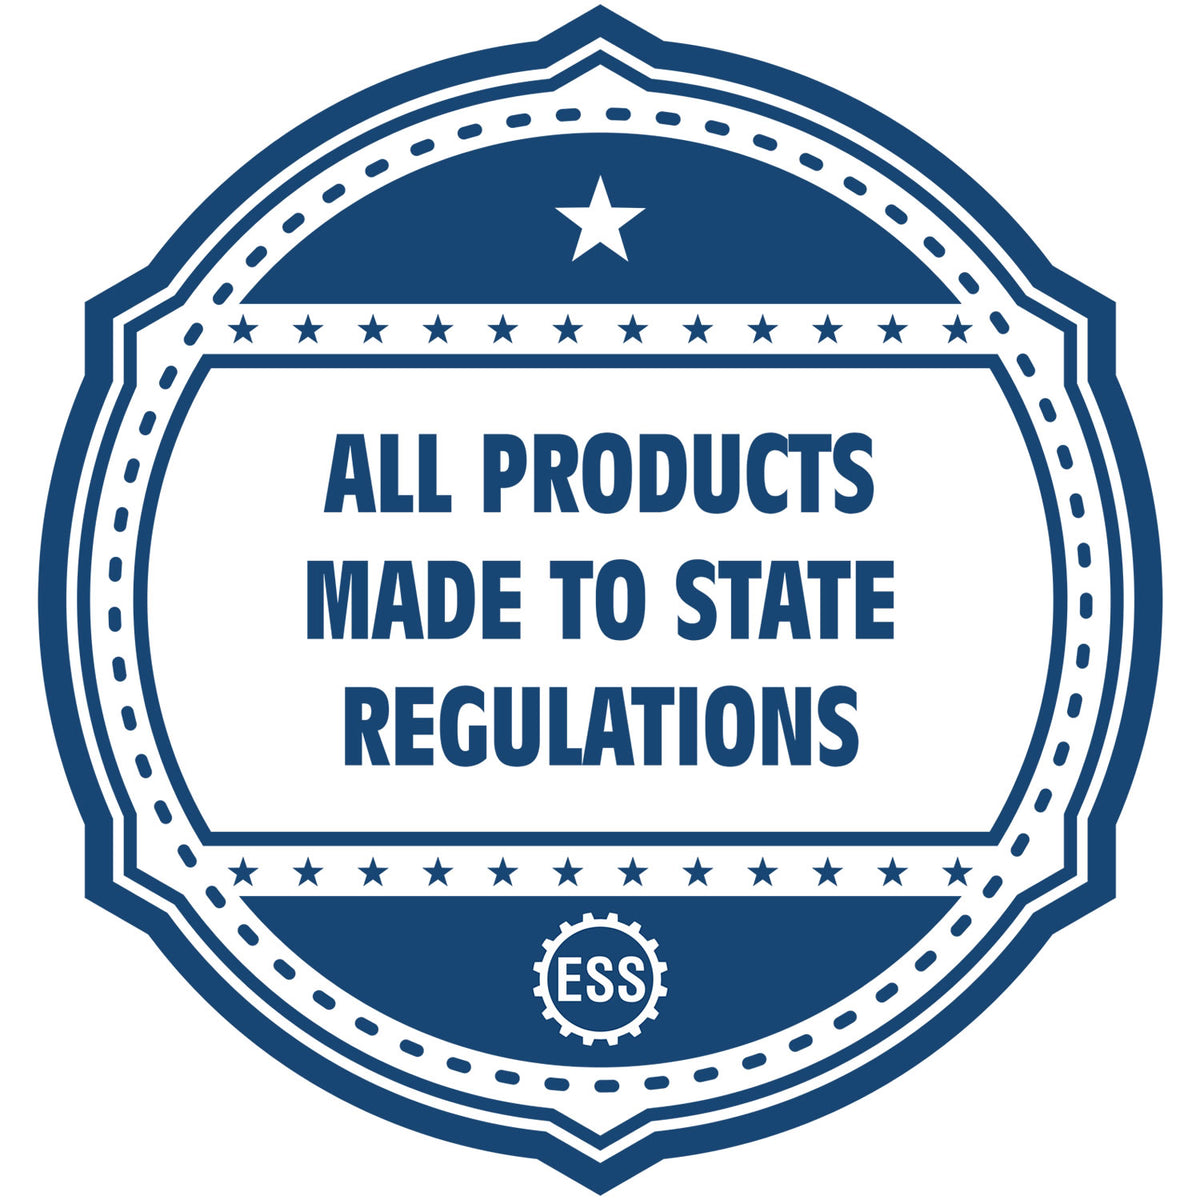 An icon or badge element for the Slim Pre-Inked Connecticut Land Surveyor Seal Stamp showing that this product is made in compliance with state regulations.